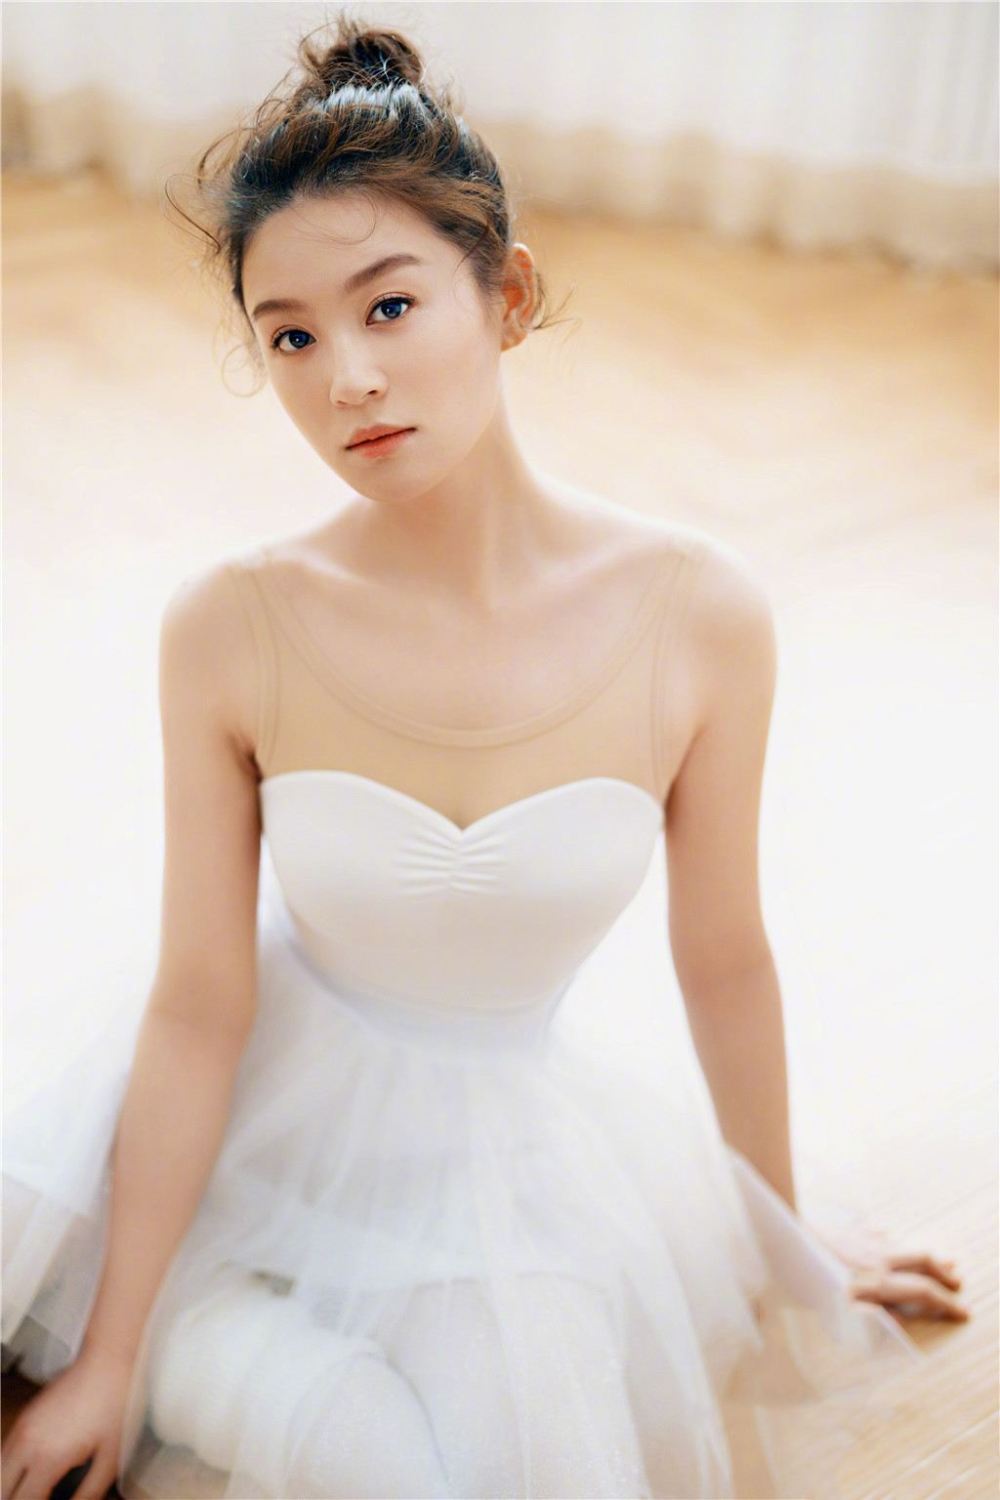 Yixuan Zeng Sexy and Hottest Photos , Latest Pics